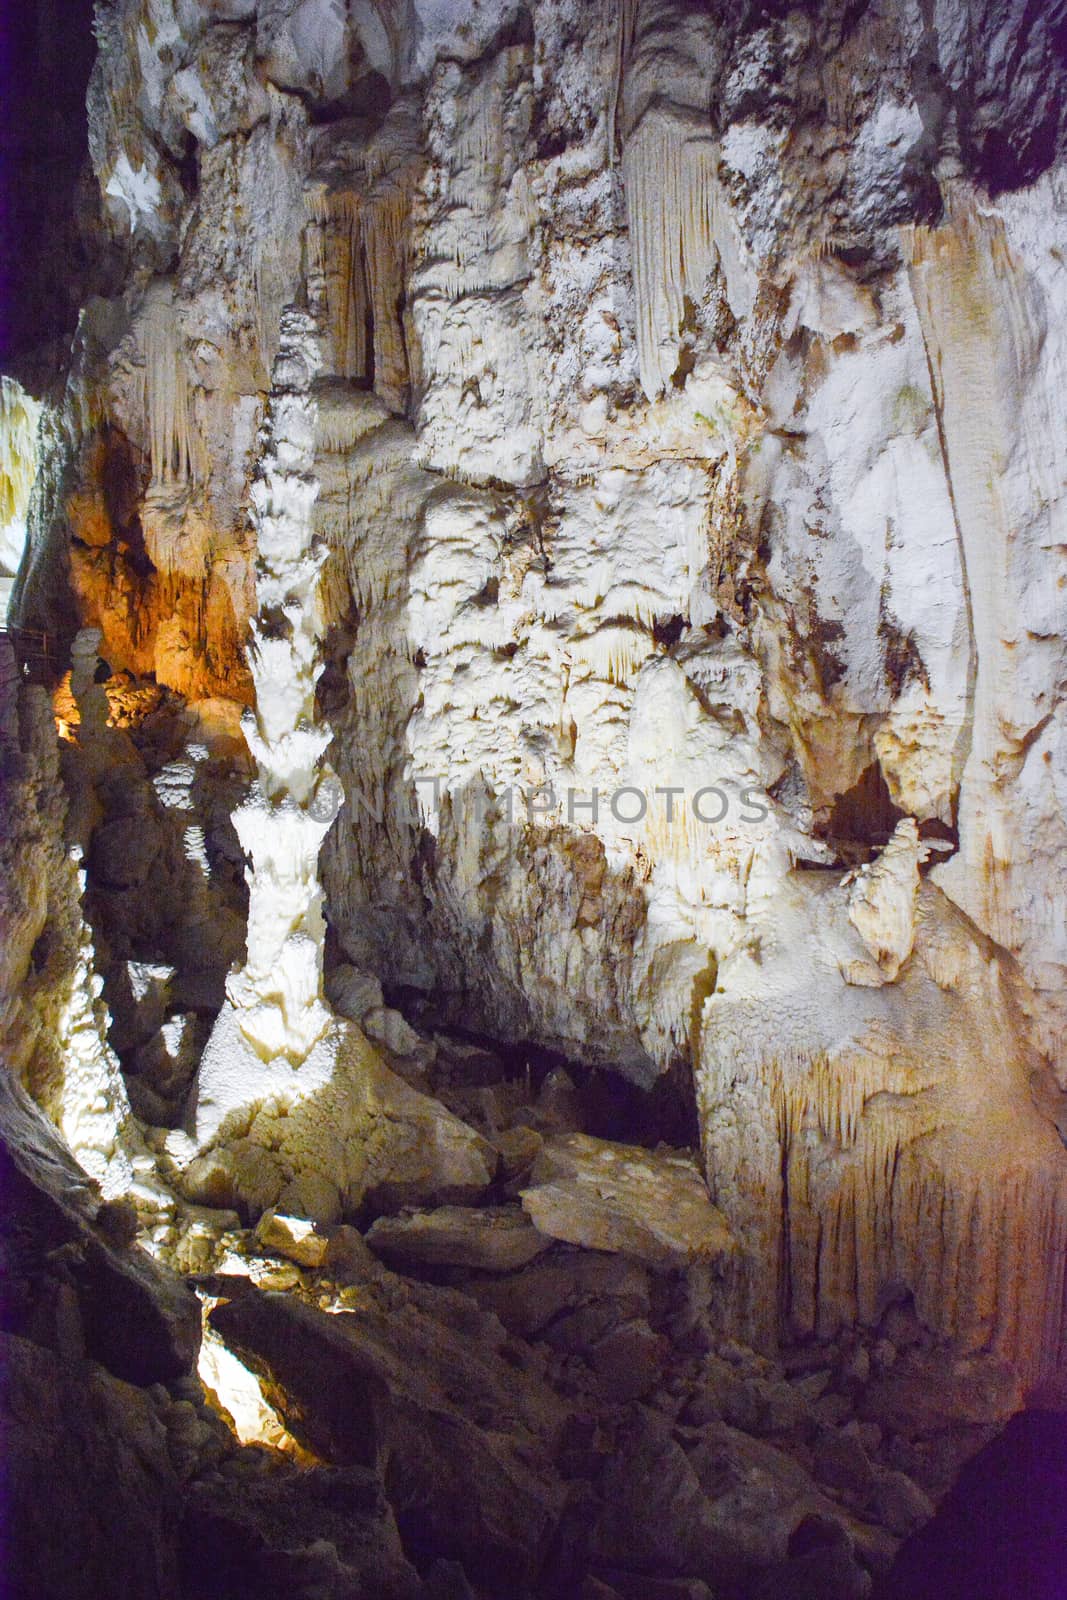 spectacular stalactites in a network of caves in Italy